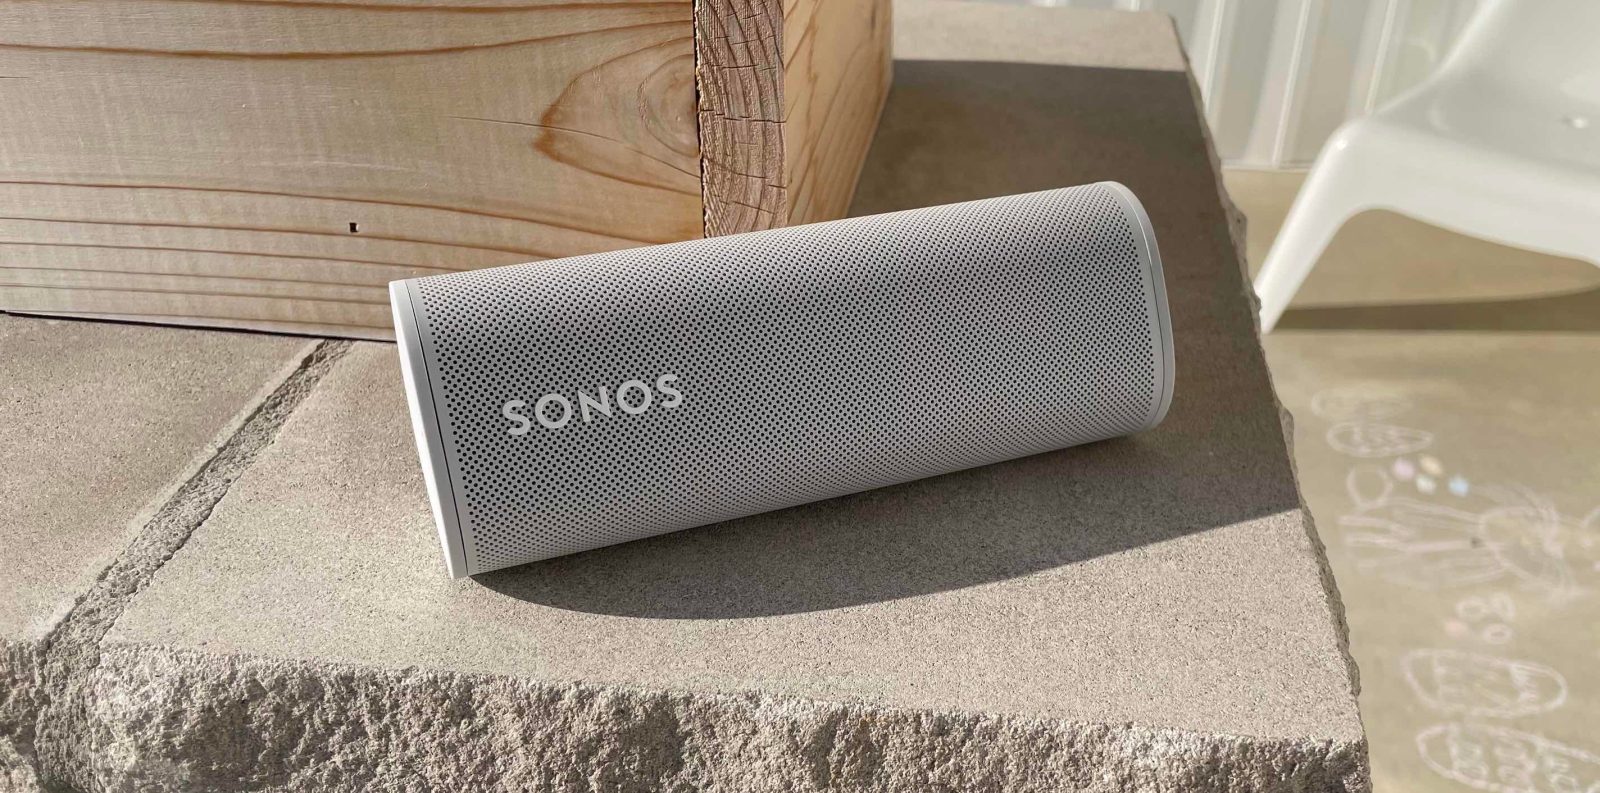 photo of Sonos allegedly working on small, more affordable ‘Sub Mini’ subwoofer image